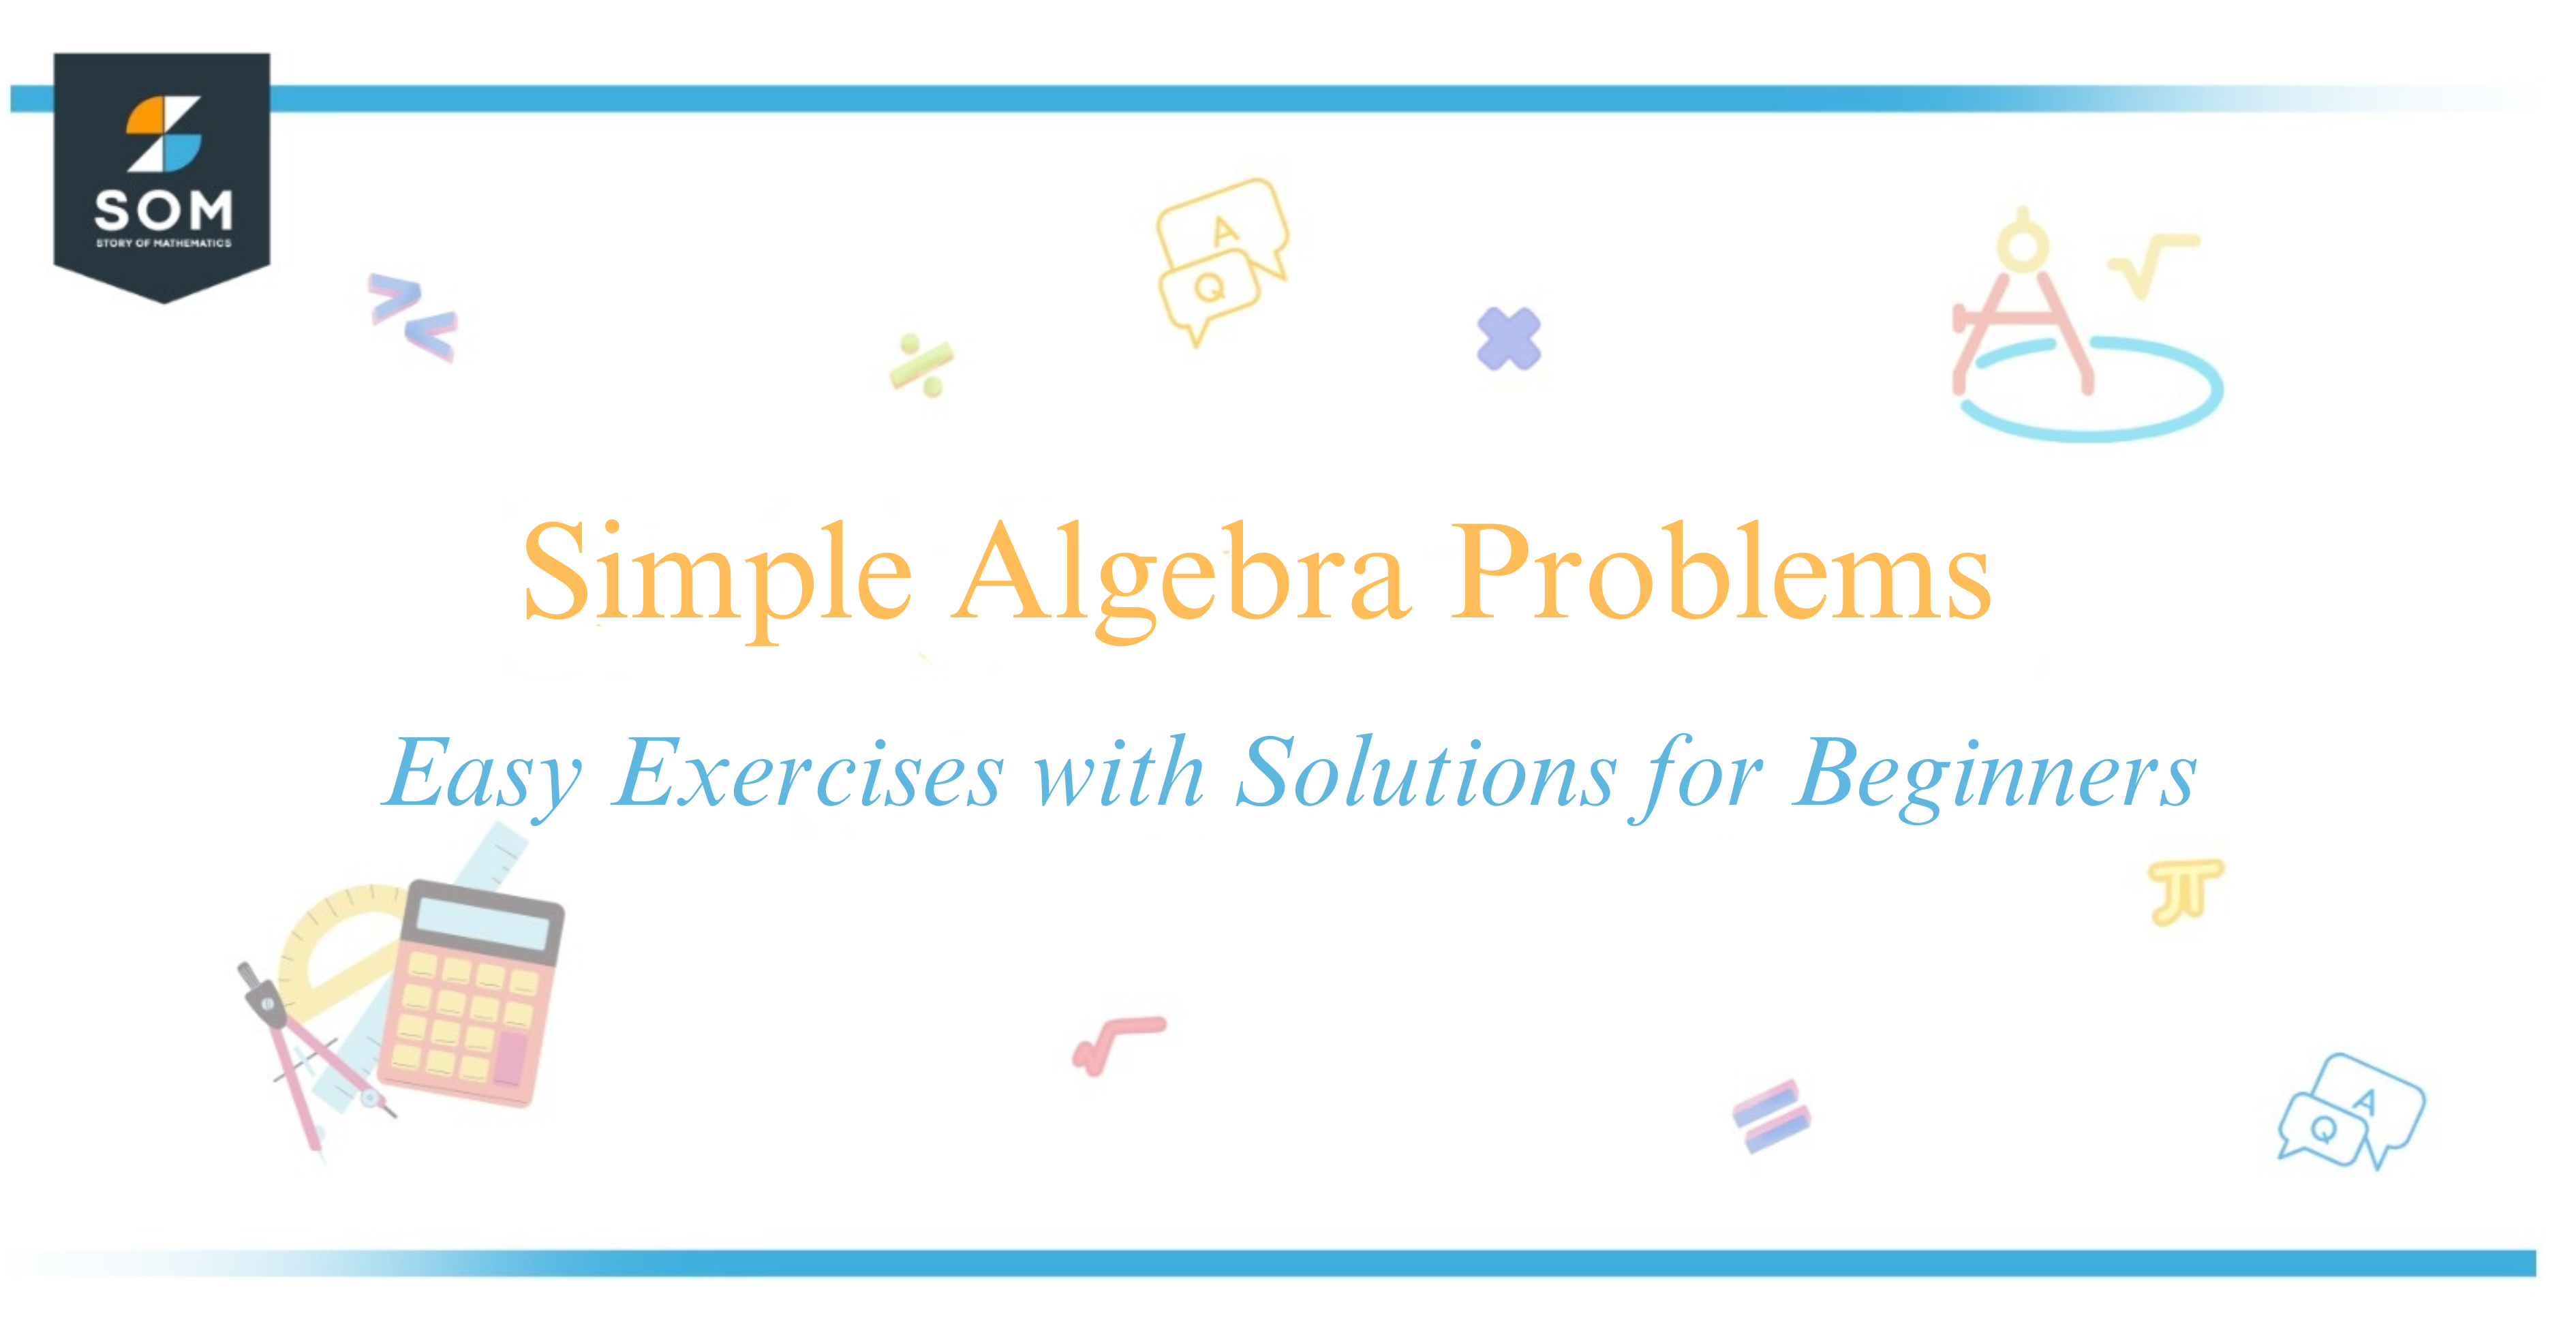 Simple Algebra Problems Easy Exercises with Solutions for Beginners